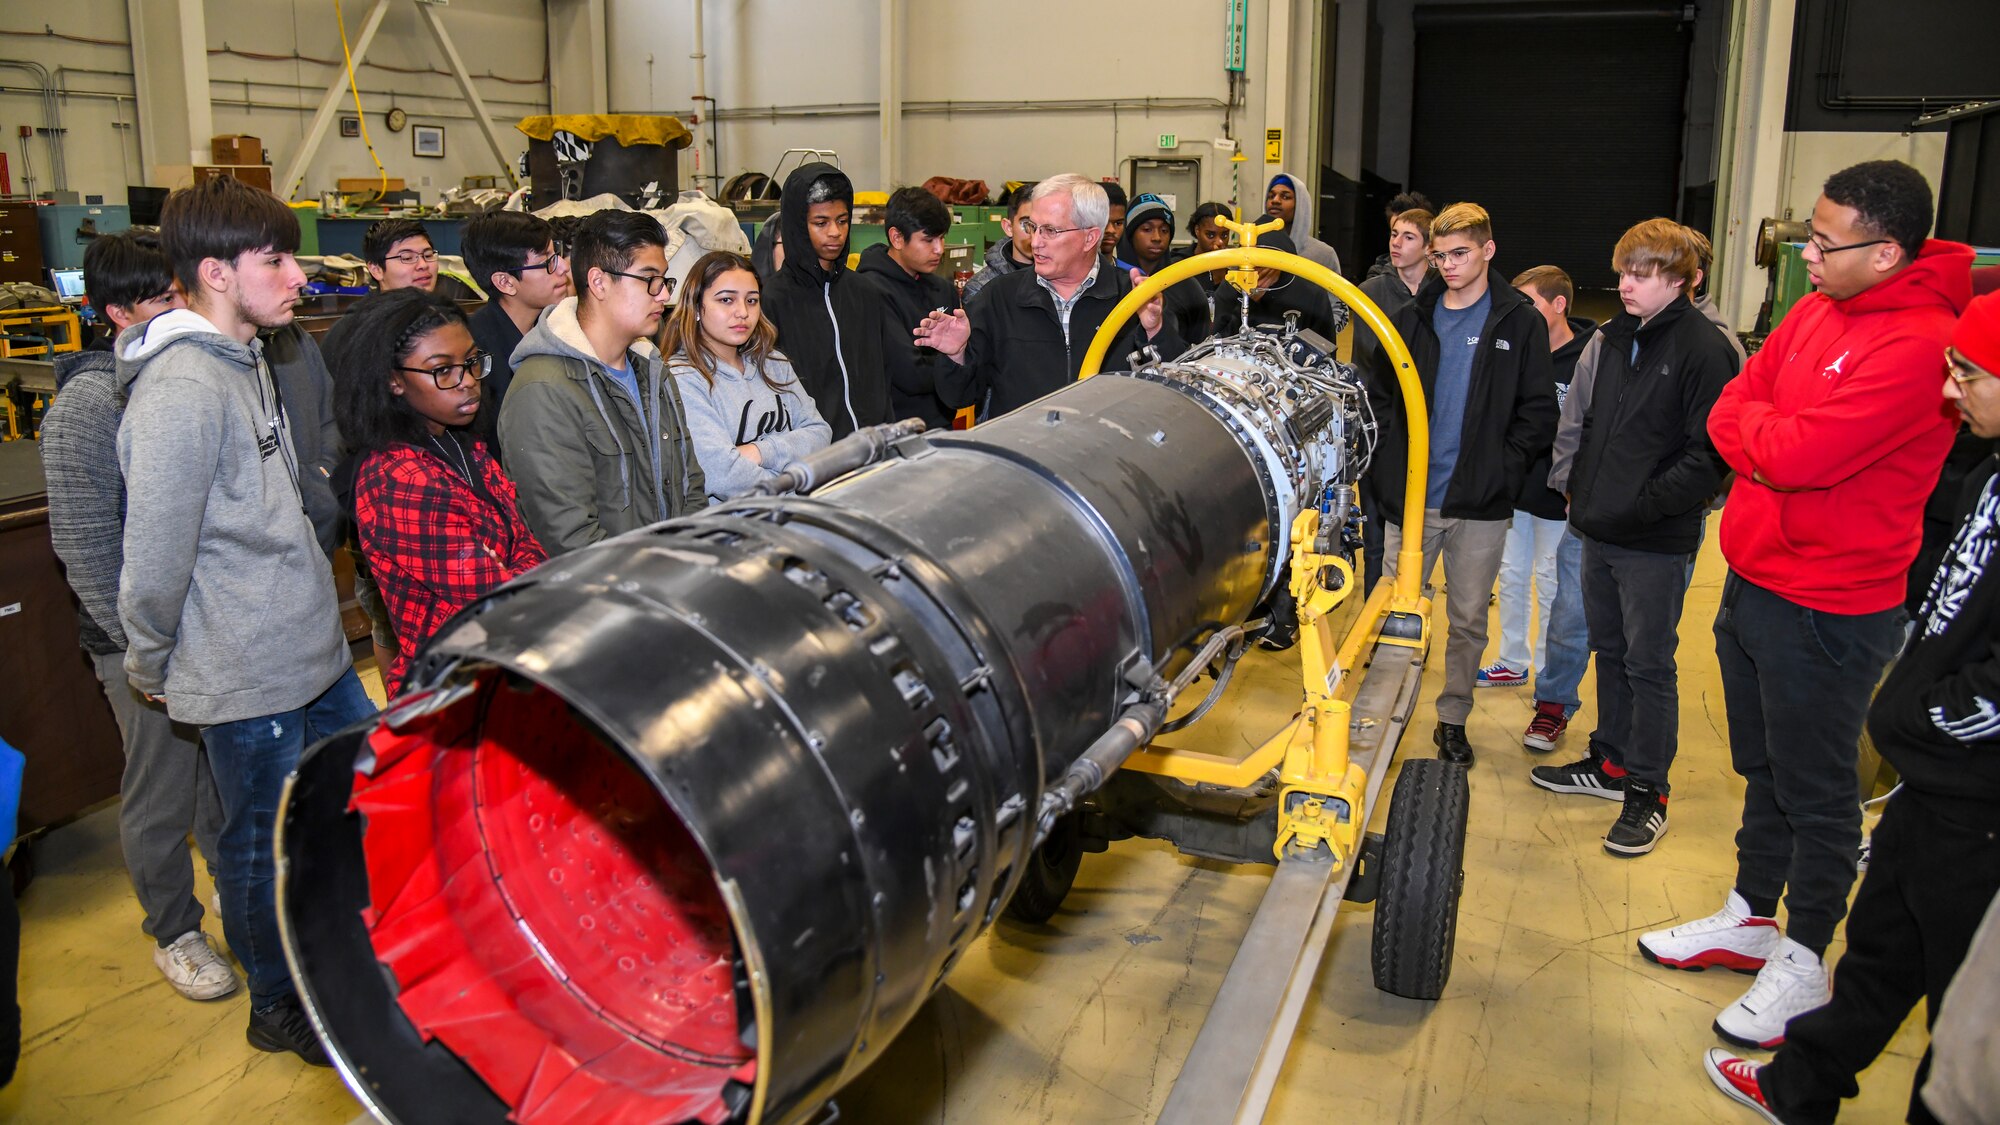 Gregory Peria, Propulsion Production Superintendent, 412th Maintenance Squadron, describes the various components of a jet engine to Victor Valley High School students during their tour of Edwards Air Force Base, California, Dec. 3. The students were members of the high school’s aviation maintenance classes, which include airframe and power plant classes as well as aircraft composite repair and fabrication. (Air Force photo by Giancarlo Casem)